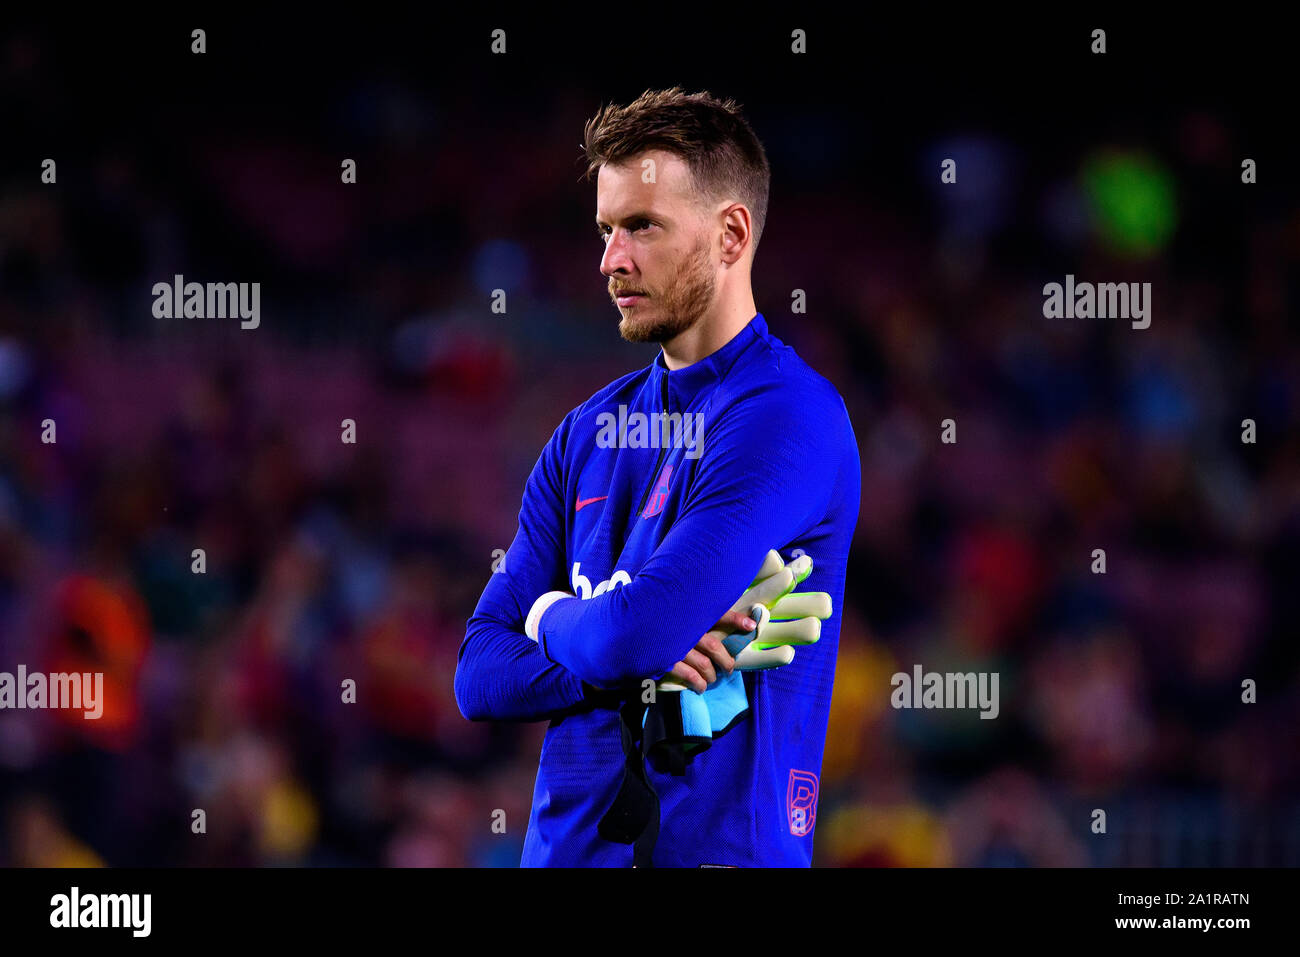 BARCELONA - SEP 24: Neto plays at the La Liga match between FC Barcelona and Villarreal CF at the Camp Nou Stadium on September 24, 2019 in Barcelona, Stock Photo